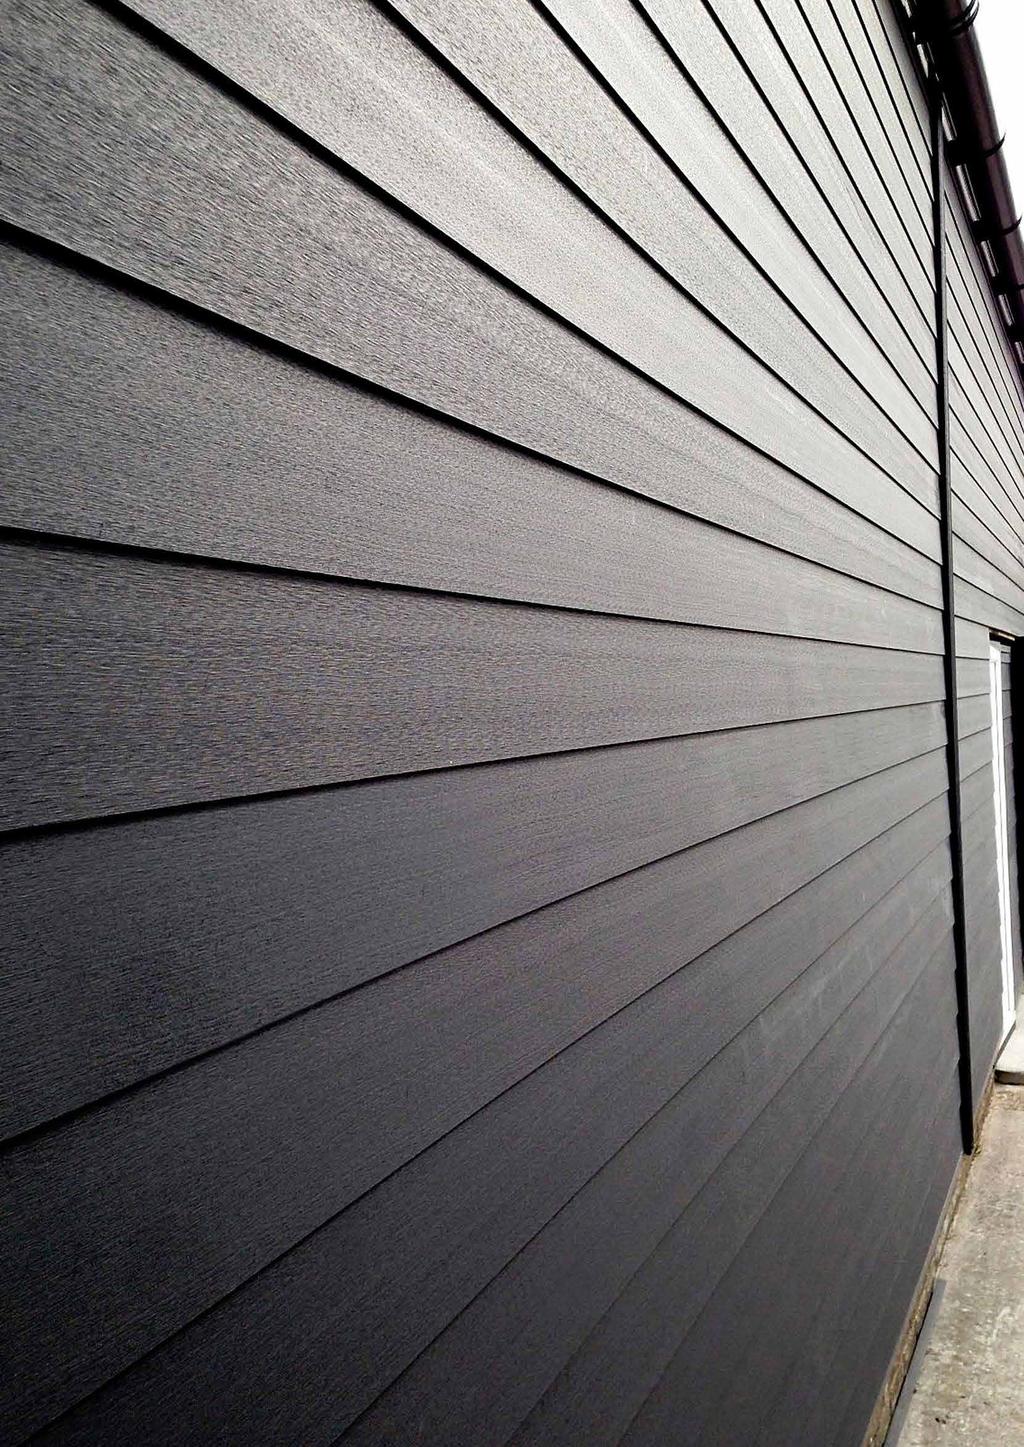 Weatherboard Range Weatherboard Flush The difference between